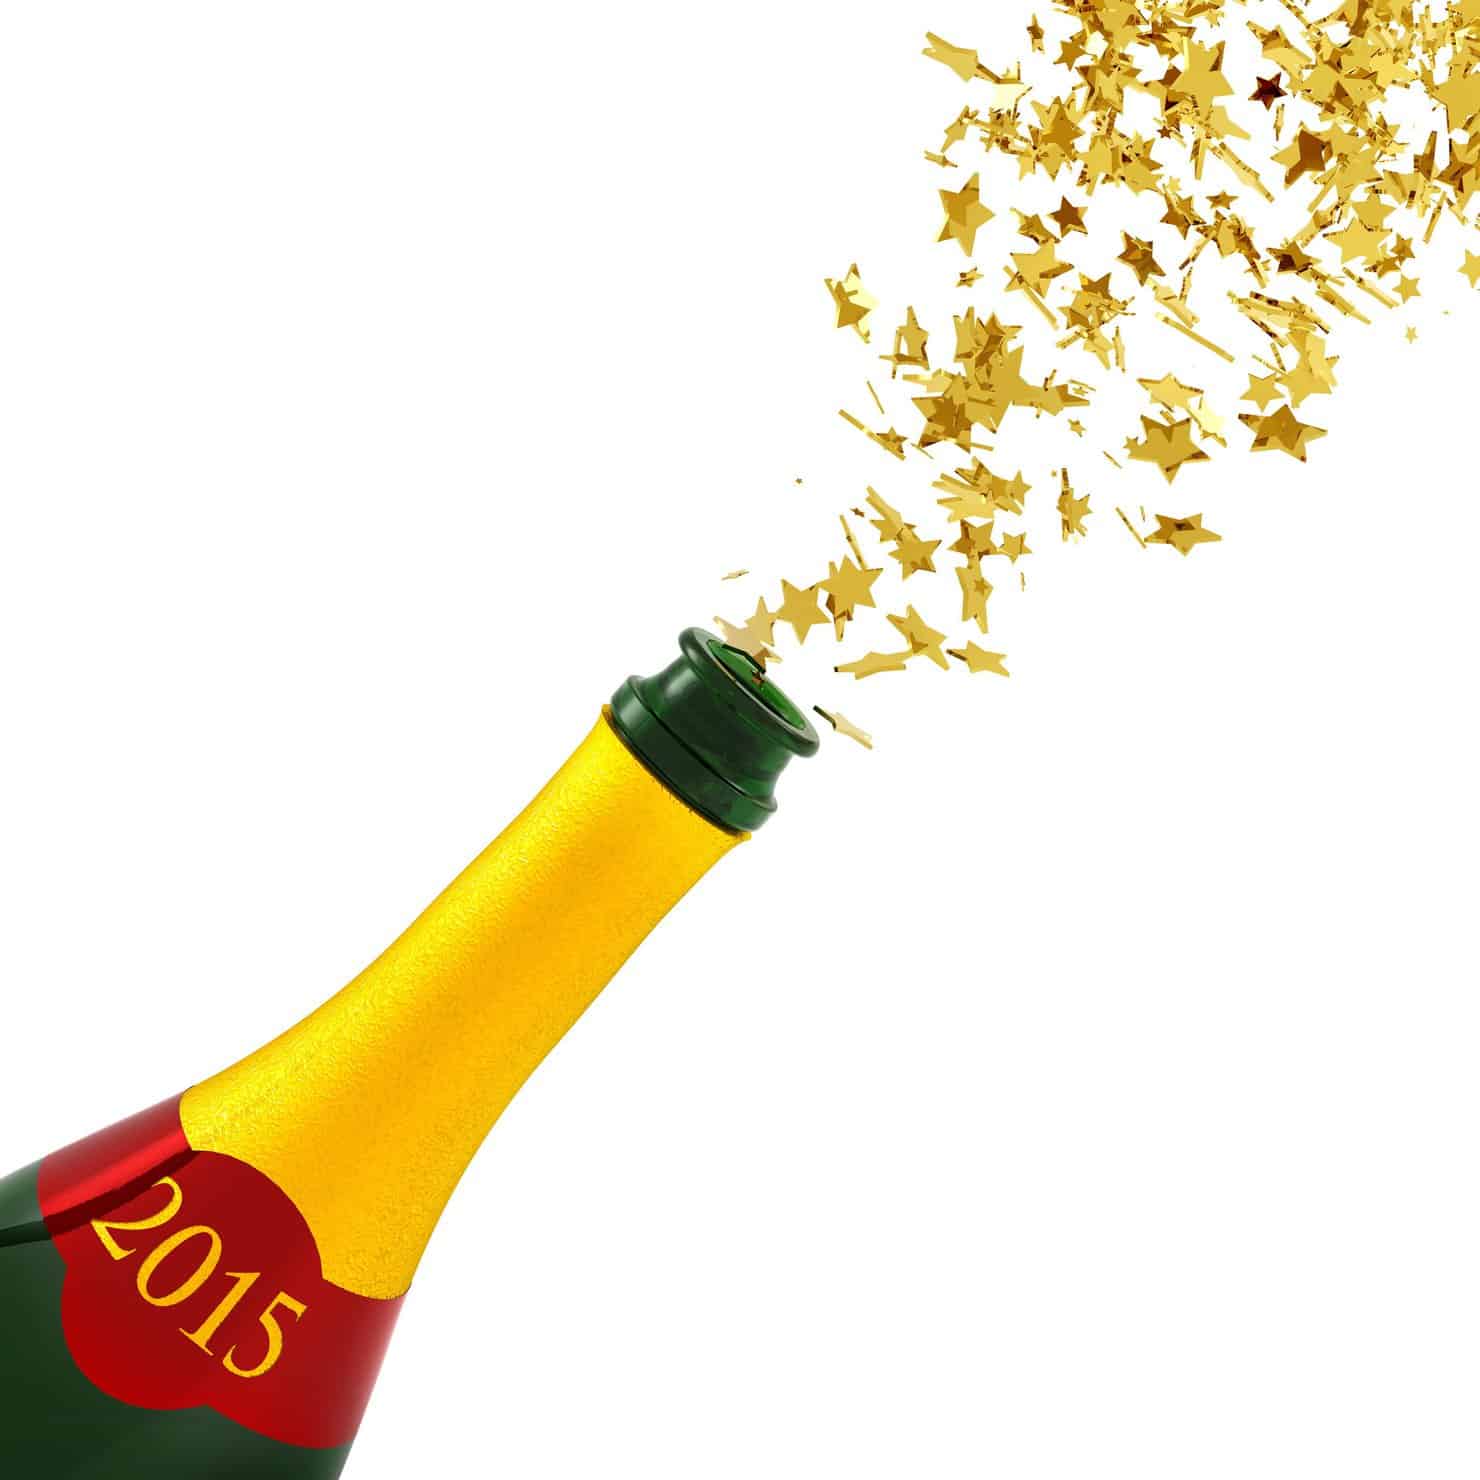 Planning Your Marijuana New Year’s Eve Party. 2015 popped champagne bottle 